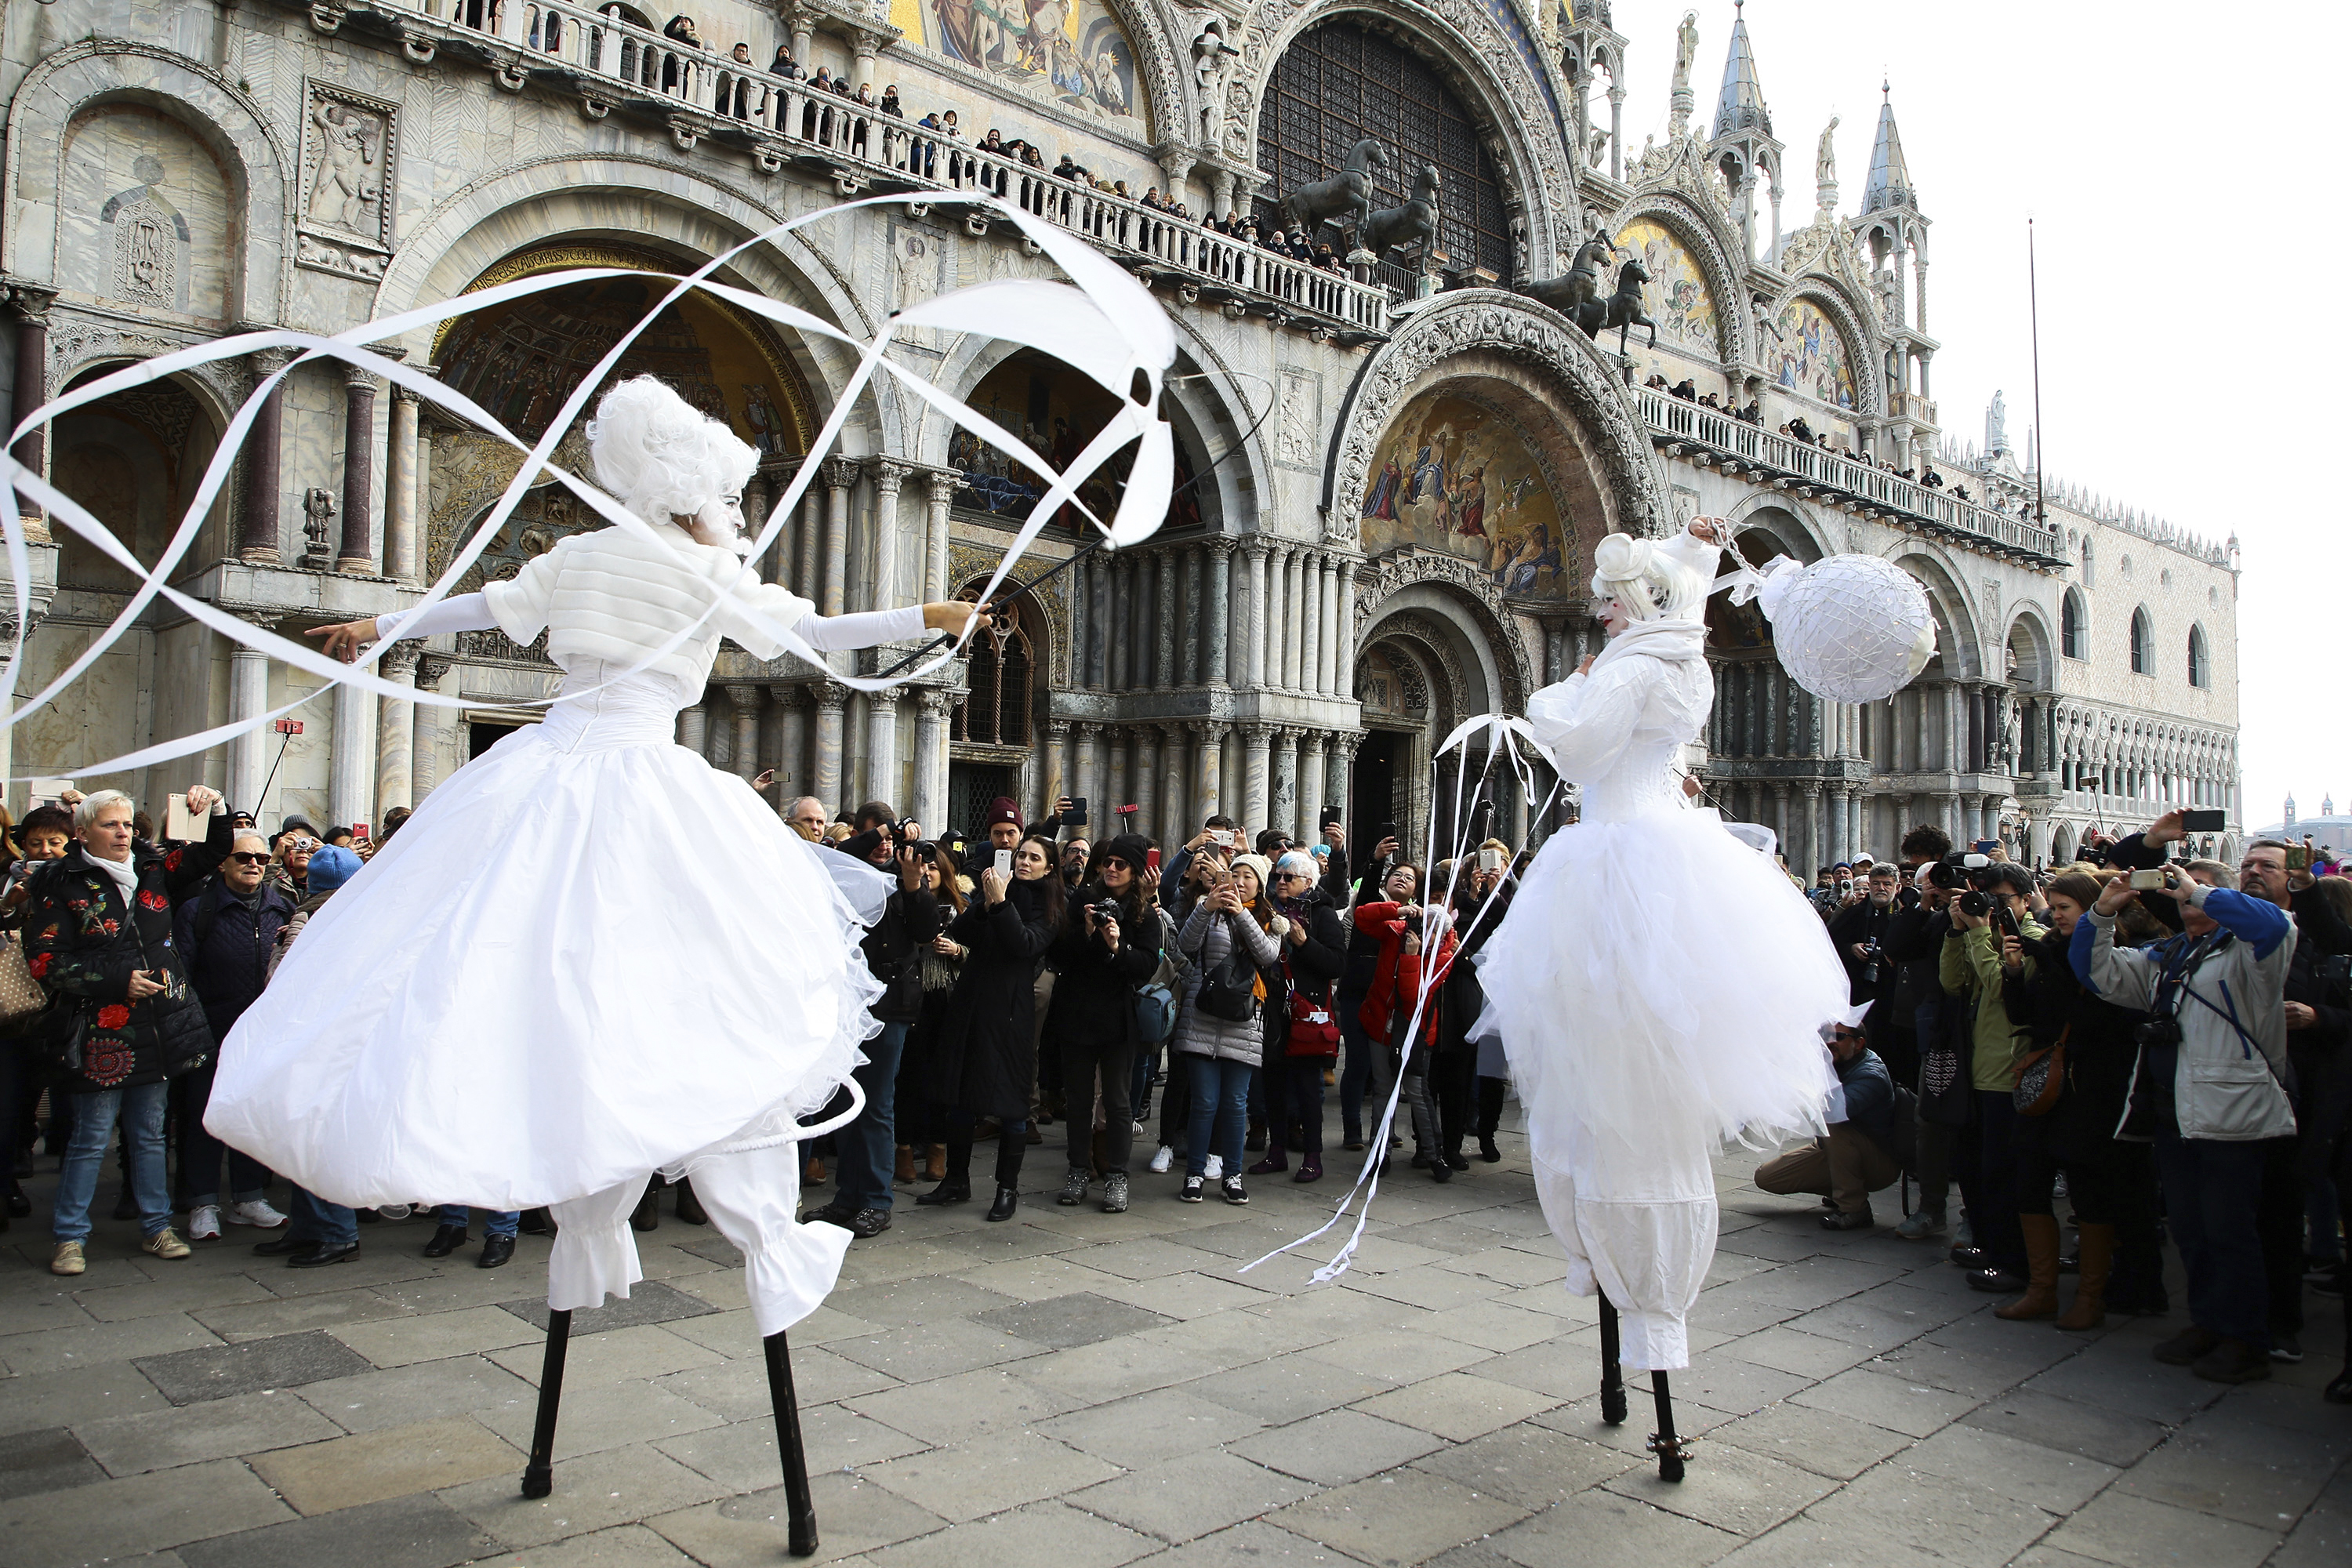 People wearing costumes attend the traditional events of Carnival 'Cutting off the Bull's head' and 'Dance of the Masks' on February 8, 2018 in Venice, Italy. The 'Cutting off the Bull's head' is an ancient tradition that commemorates the victory of the Doge Vitale Michiel II over the rebel Ulrich, Patriarch of Aquileia and 12 feudal lords in 1162. (Photo by Matteo Chinellato/NurPhoto/Sipa USA)(Sipa via AP Images)